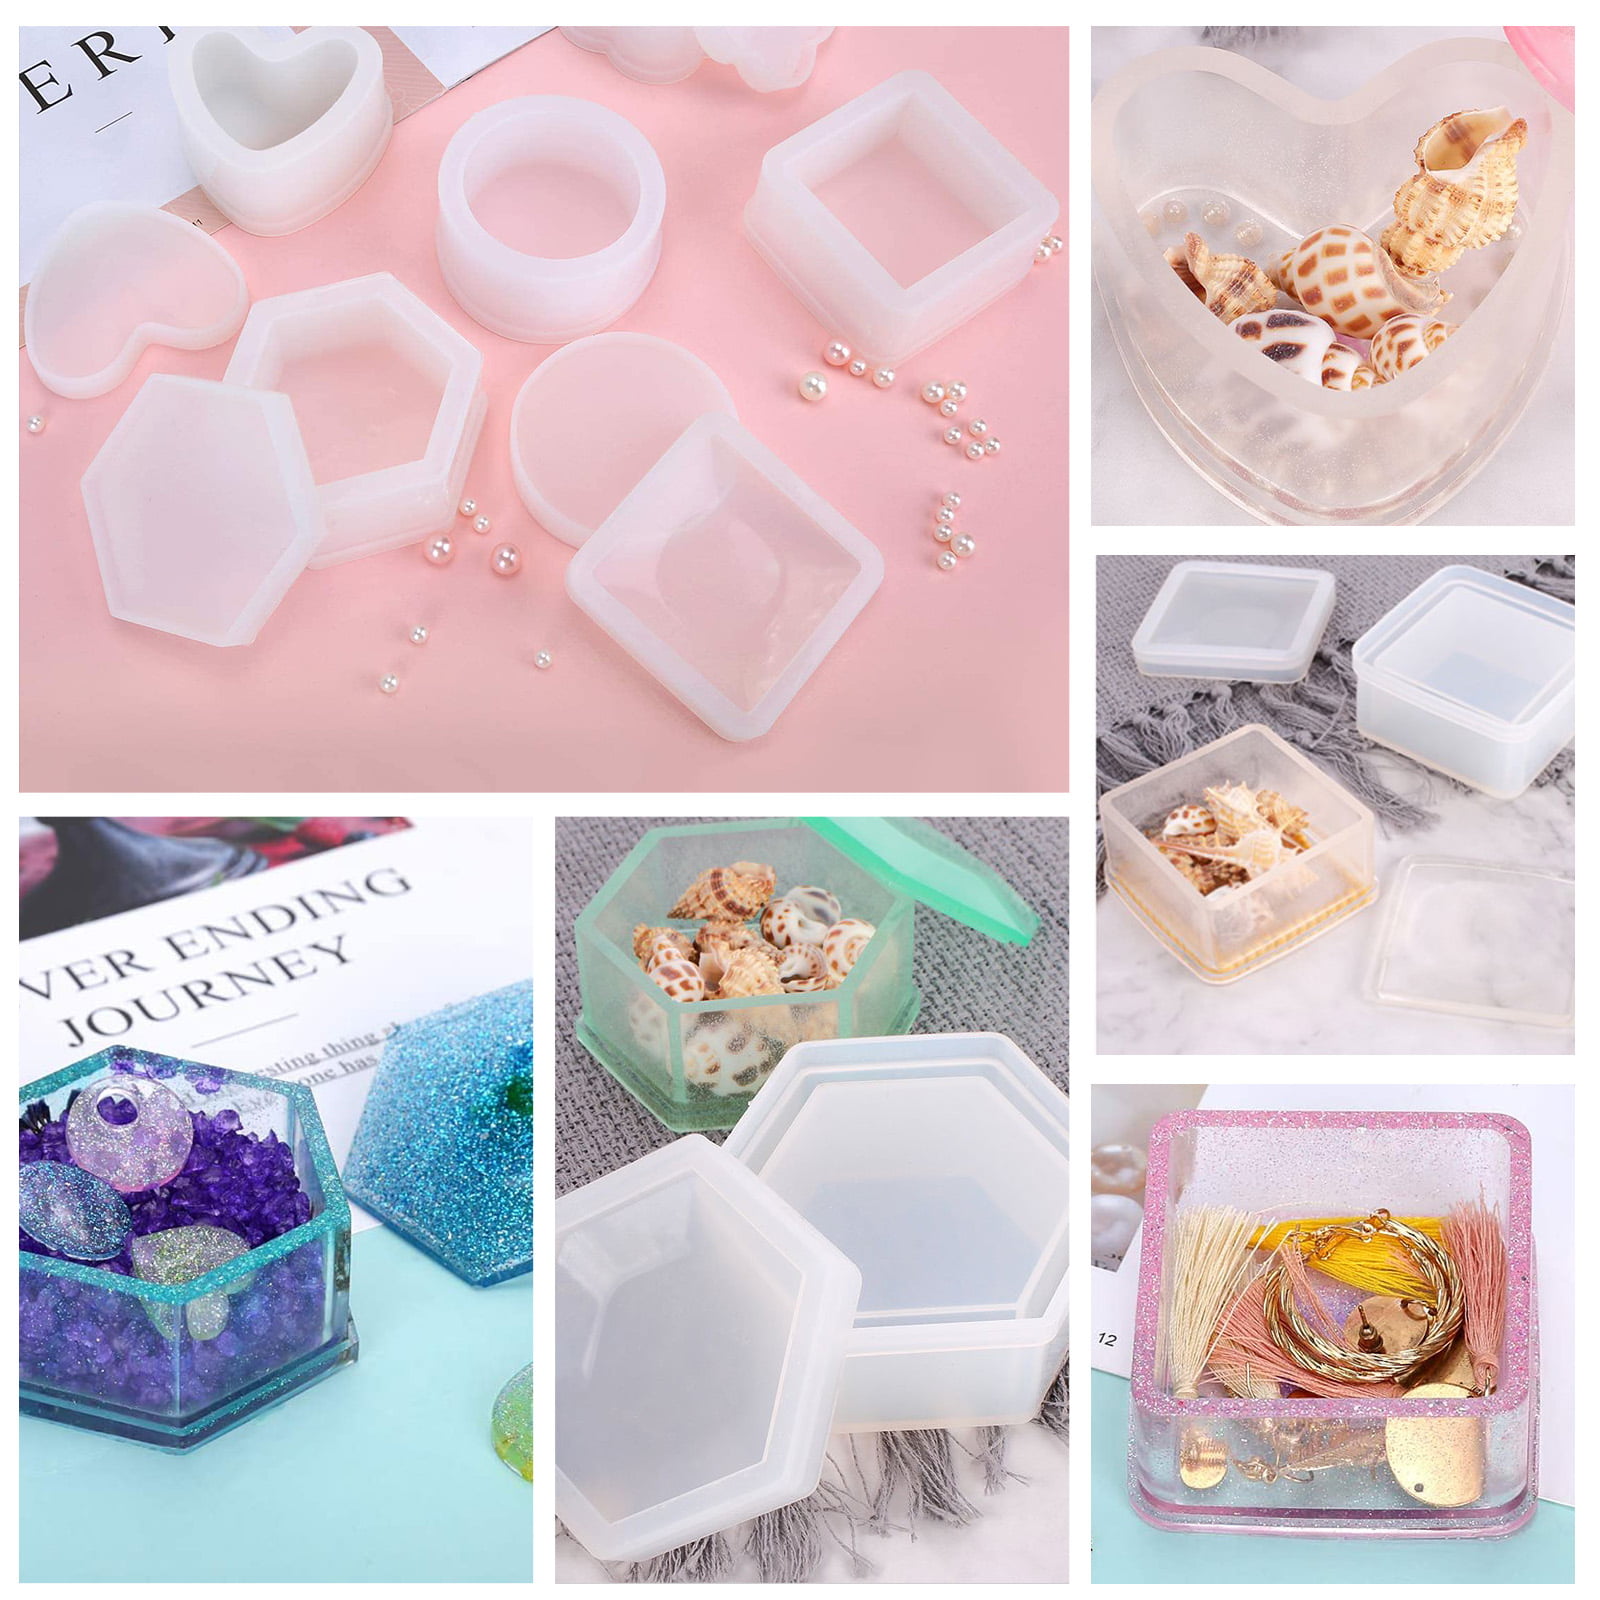 DIY Silicone Mold Storage Box 9/12 Grids, Rectangle Cuboid Shape, Resin  Case For Jewelry Making And Crafts From Giftvinco13, $4.9